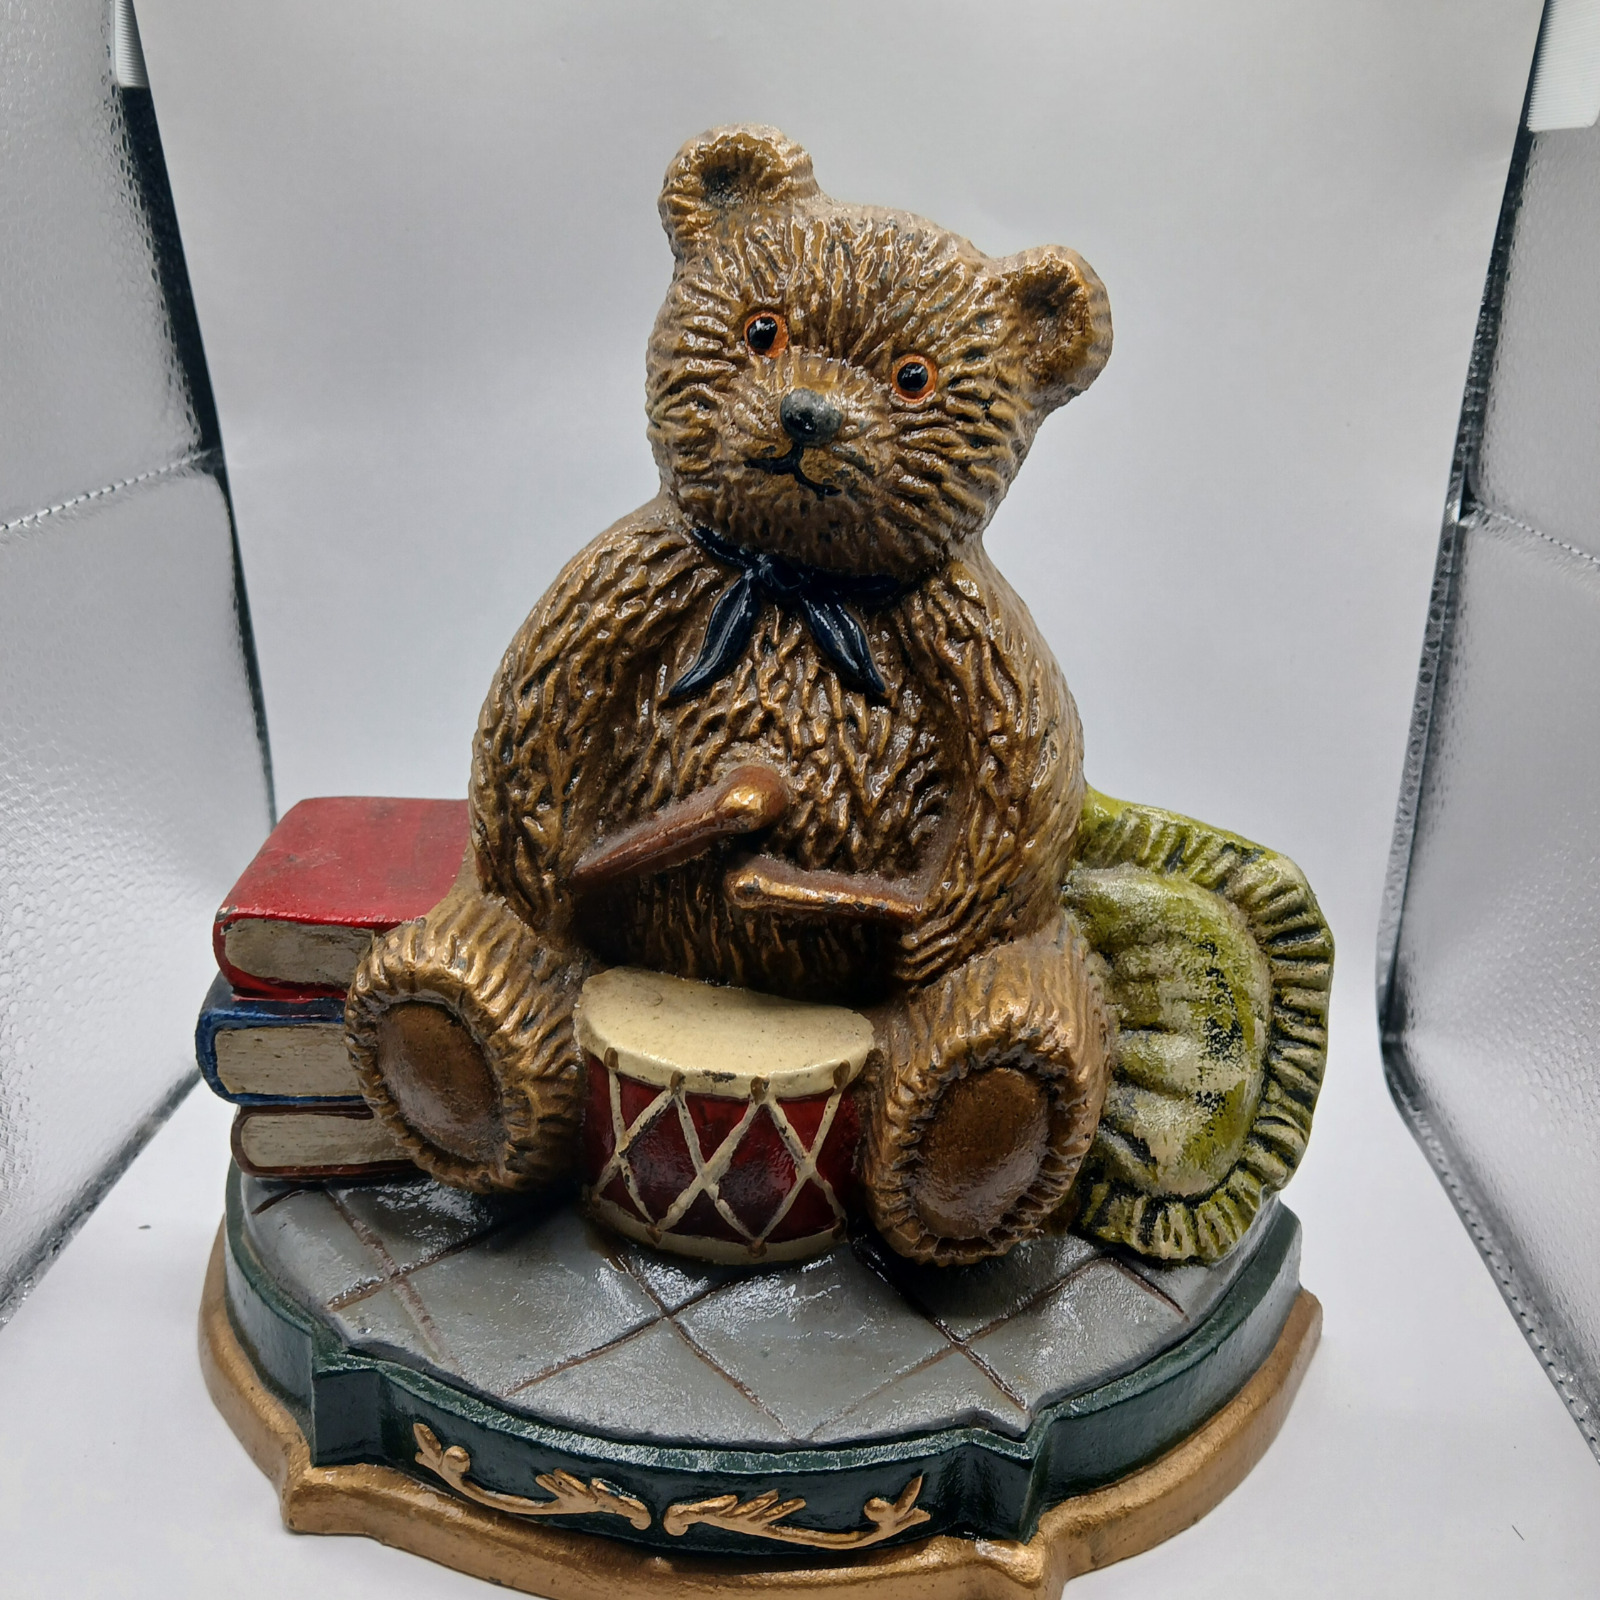 Vintage Cast Iron Teddy Bear Bookend - Pre-Owned, Drumming Bear Design